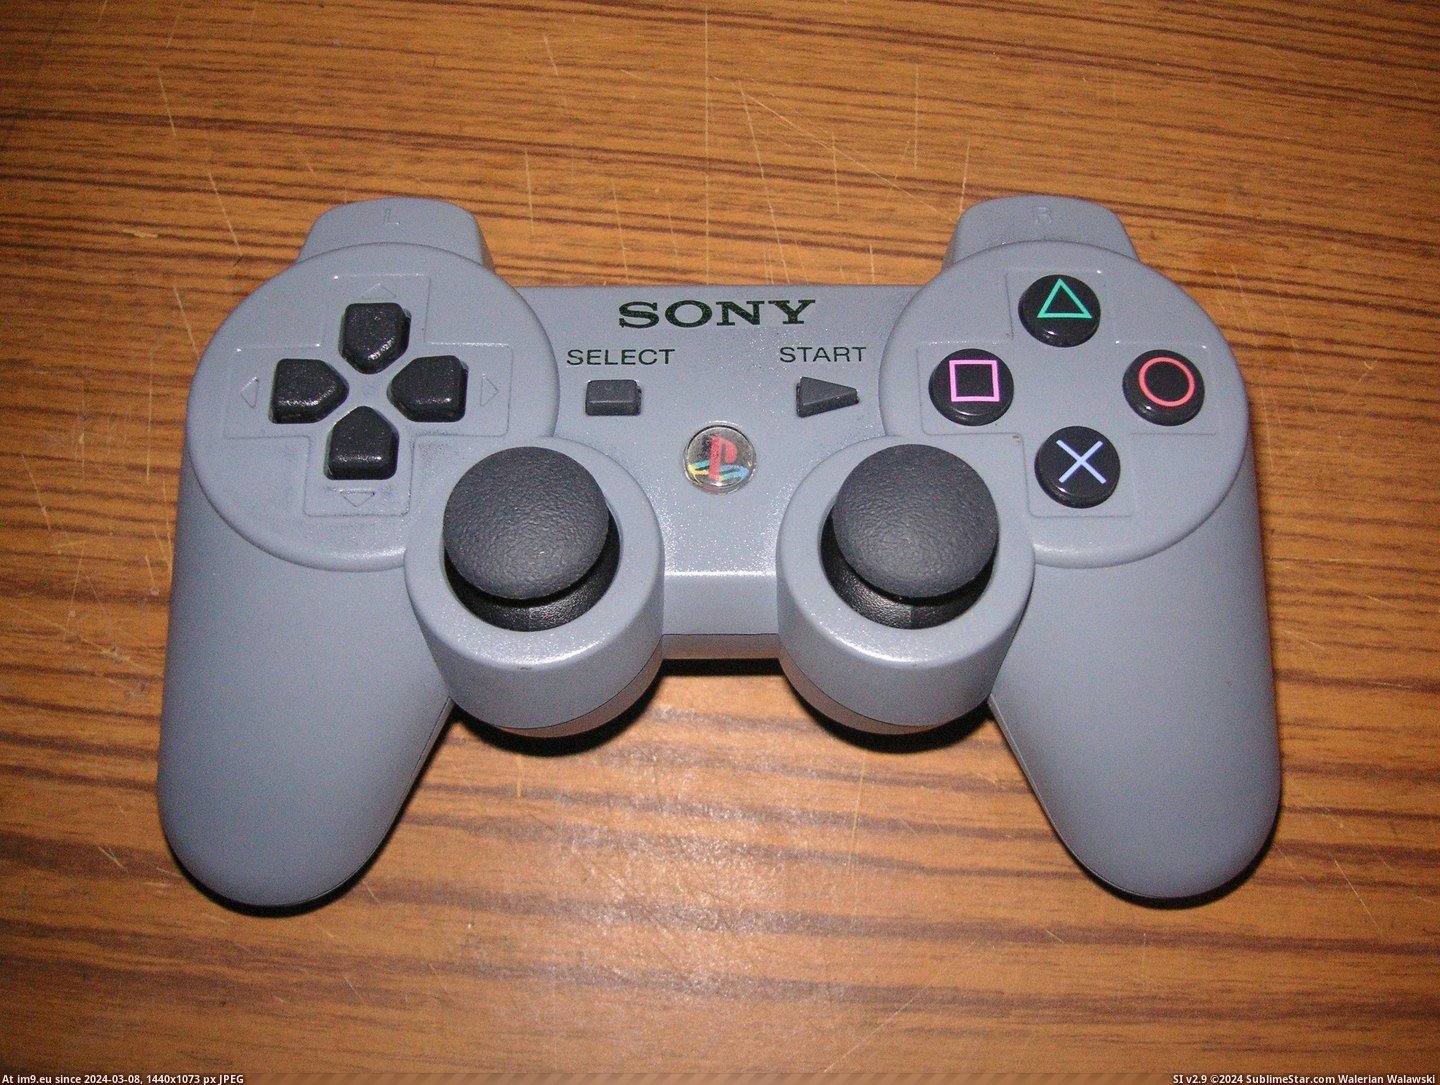 #Gaming #Style #Dualshock #Controller #Modded [Gaming] Modded my Dualshock 3 Controller, Dualshock 1 style. [OC] 5 Pic. (Image of album My r/GAMING favs))